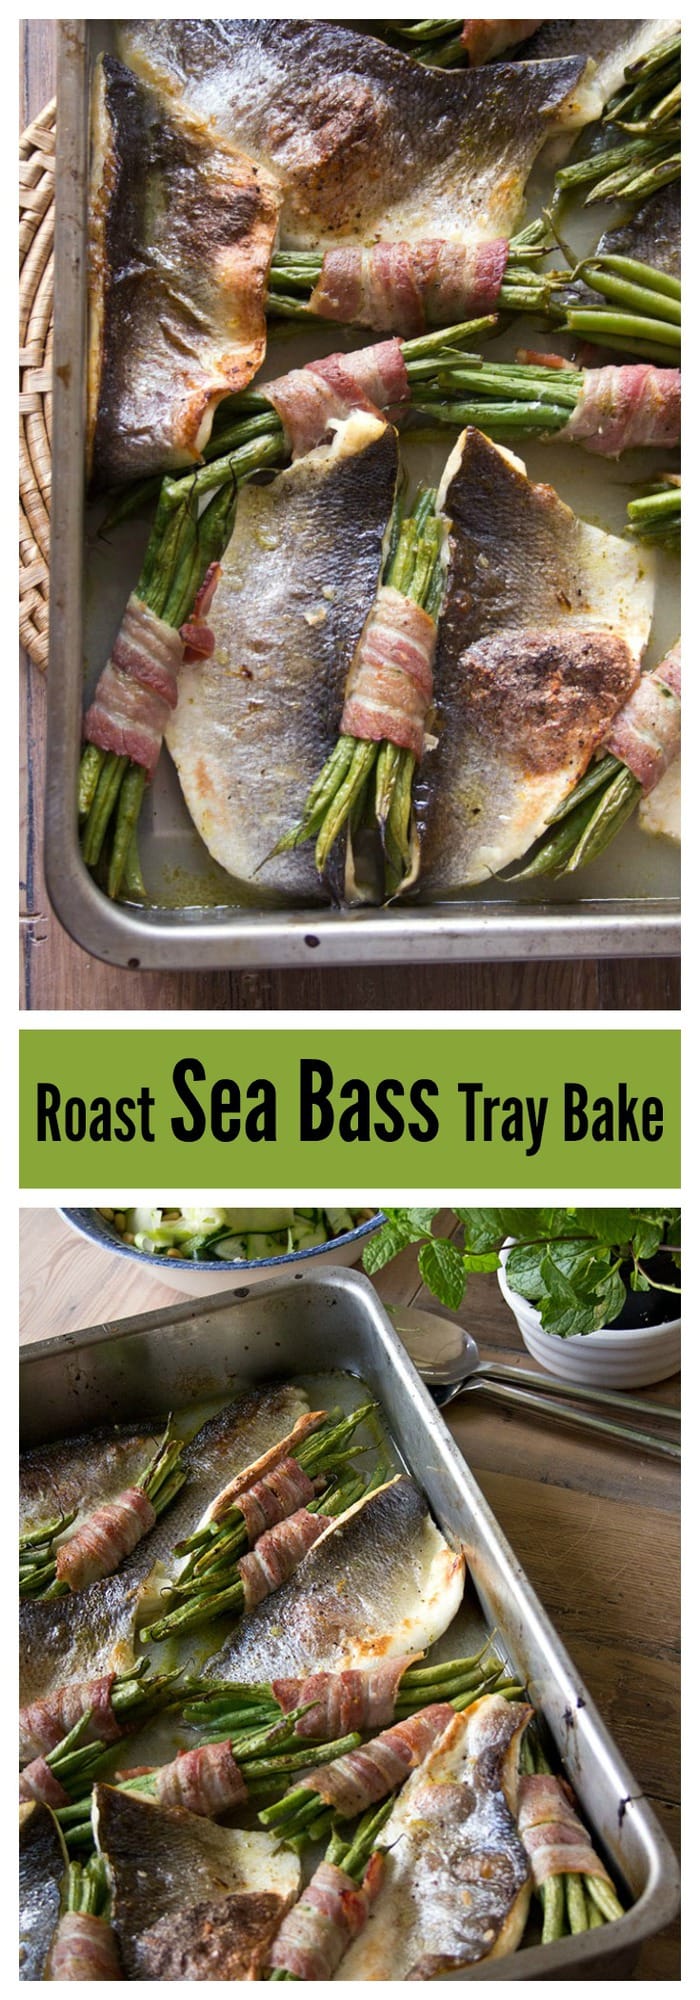 Get some Omega 3 in you with this quick, light and impressive-looking dish. Roast sea bass traybake with bacon-wrapped beans, guys!